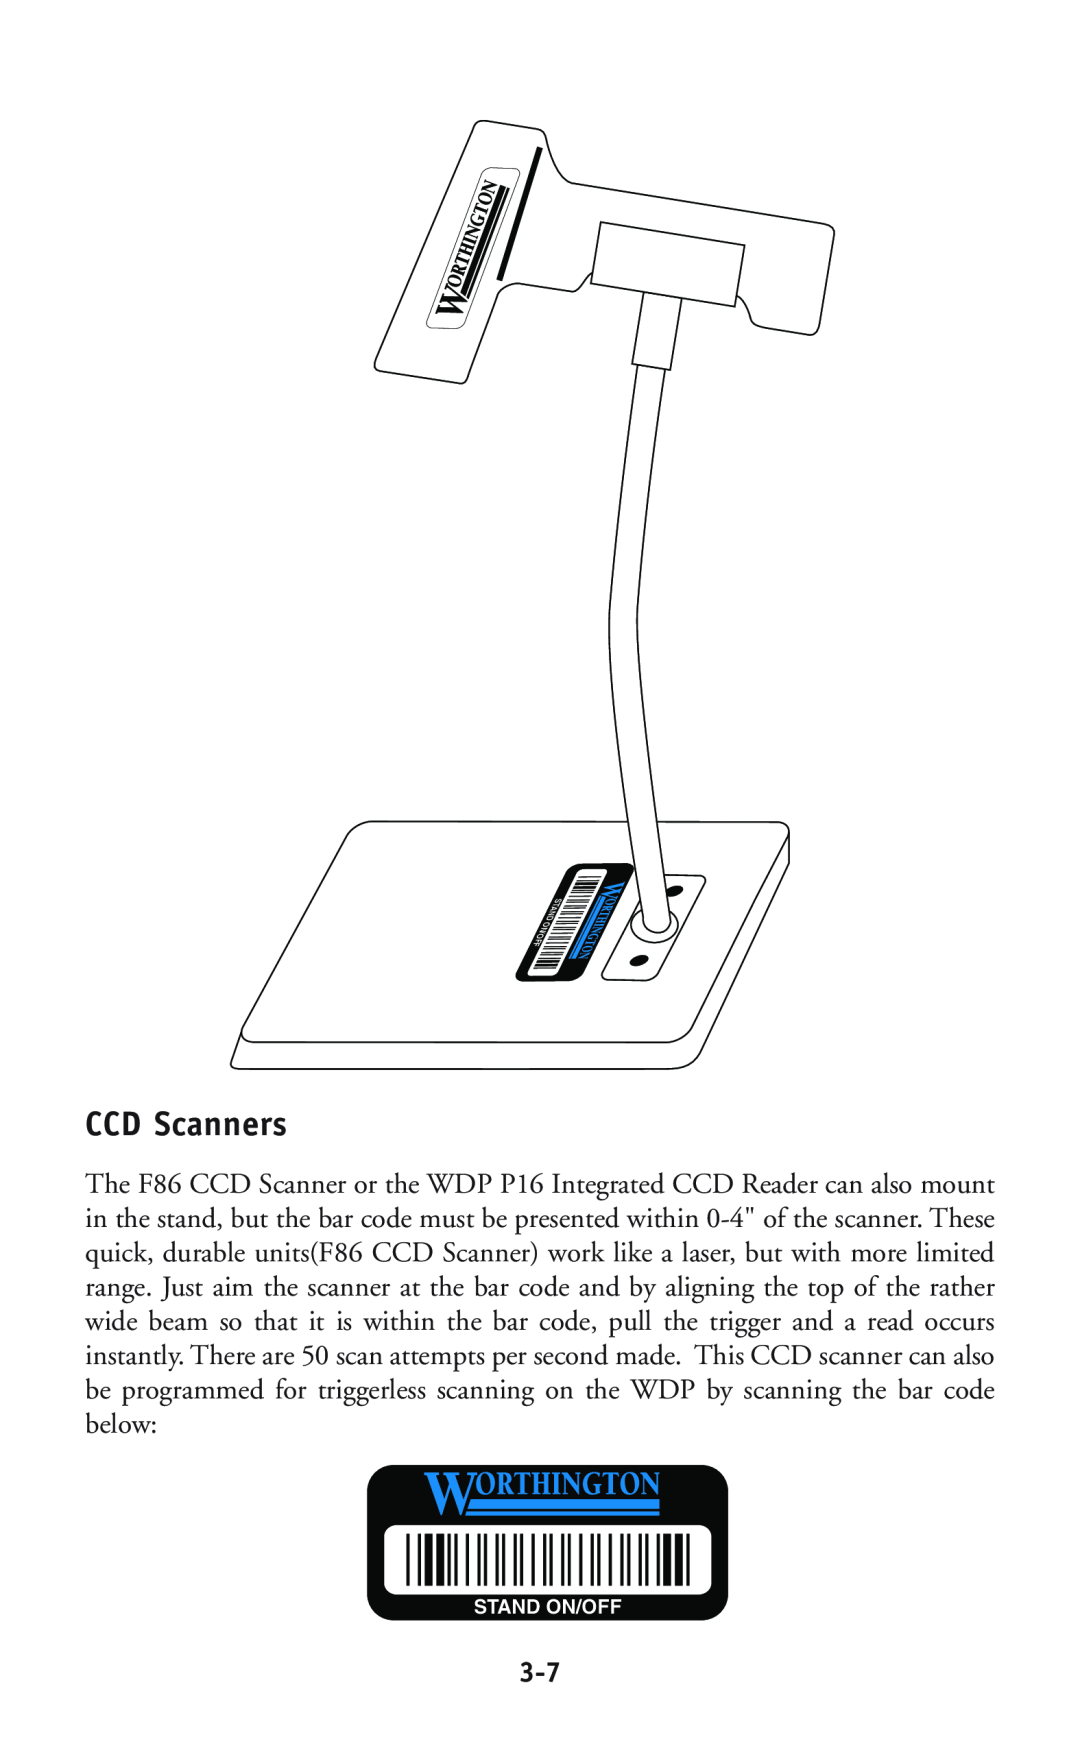 Worth Data P11/12 user manual CCD Scanners, Stand On/Off 